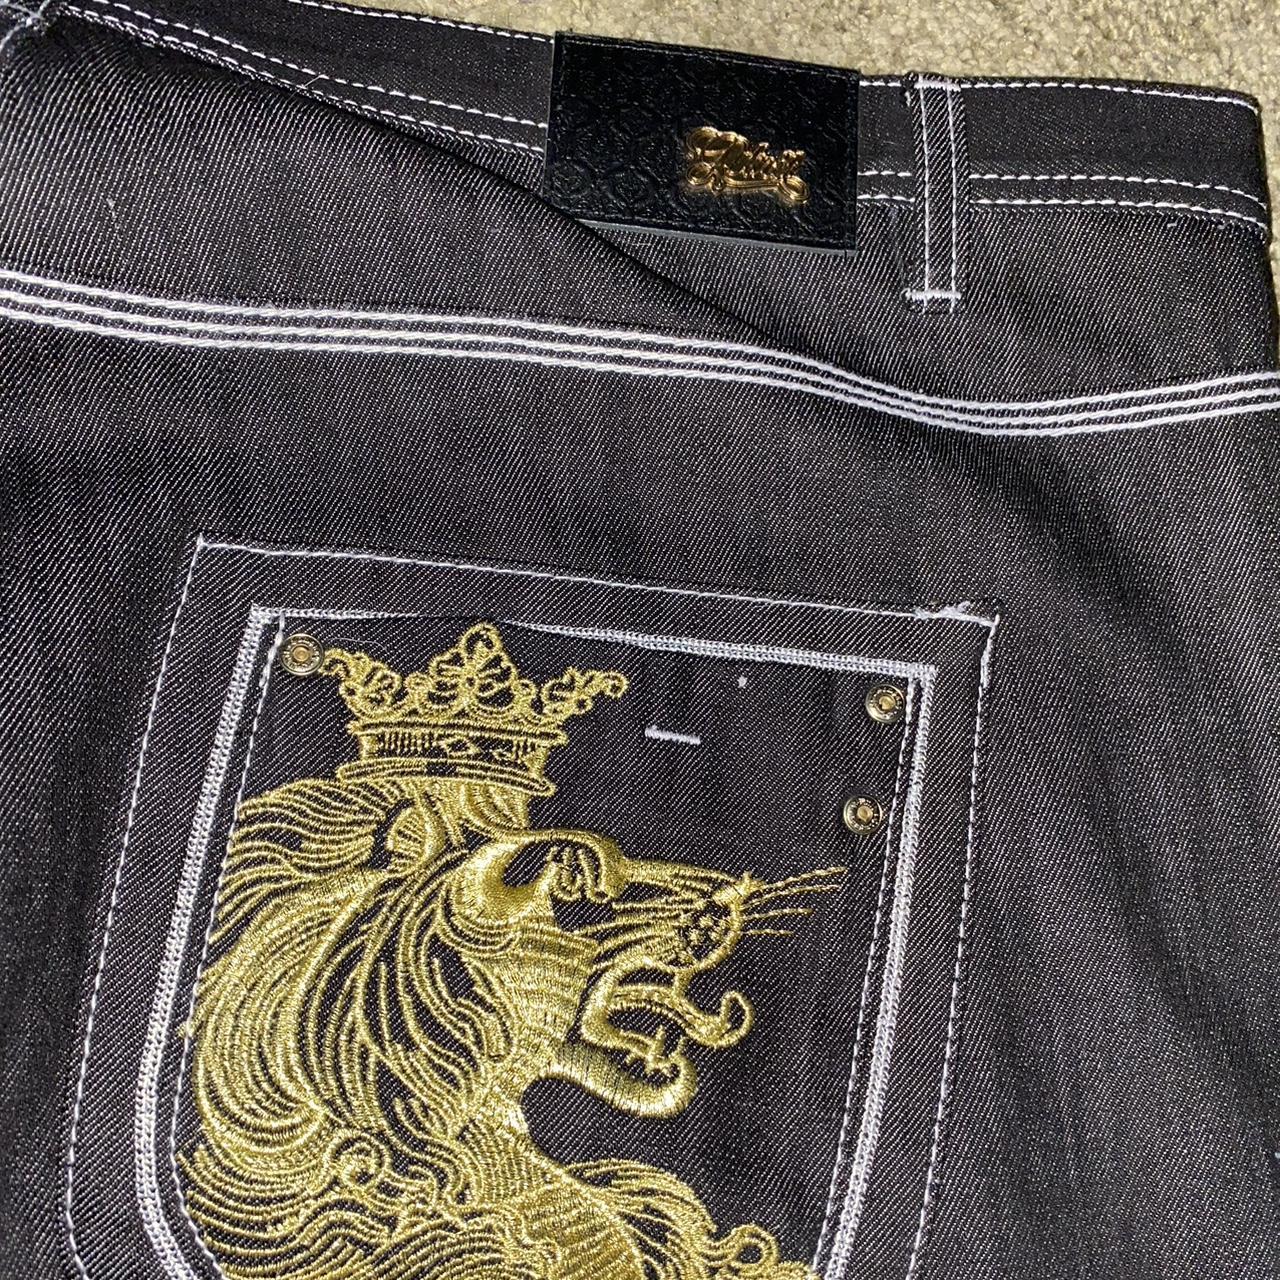 g unit baggy jeans cray embroidery on back... - Depop